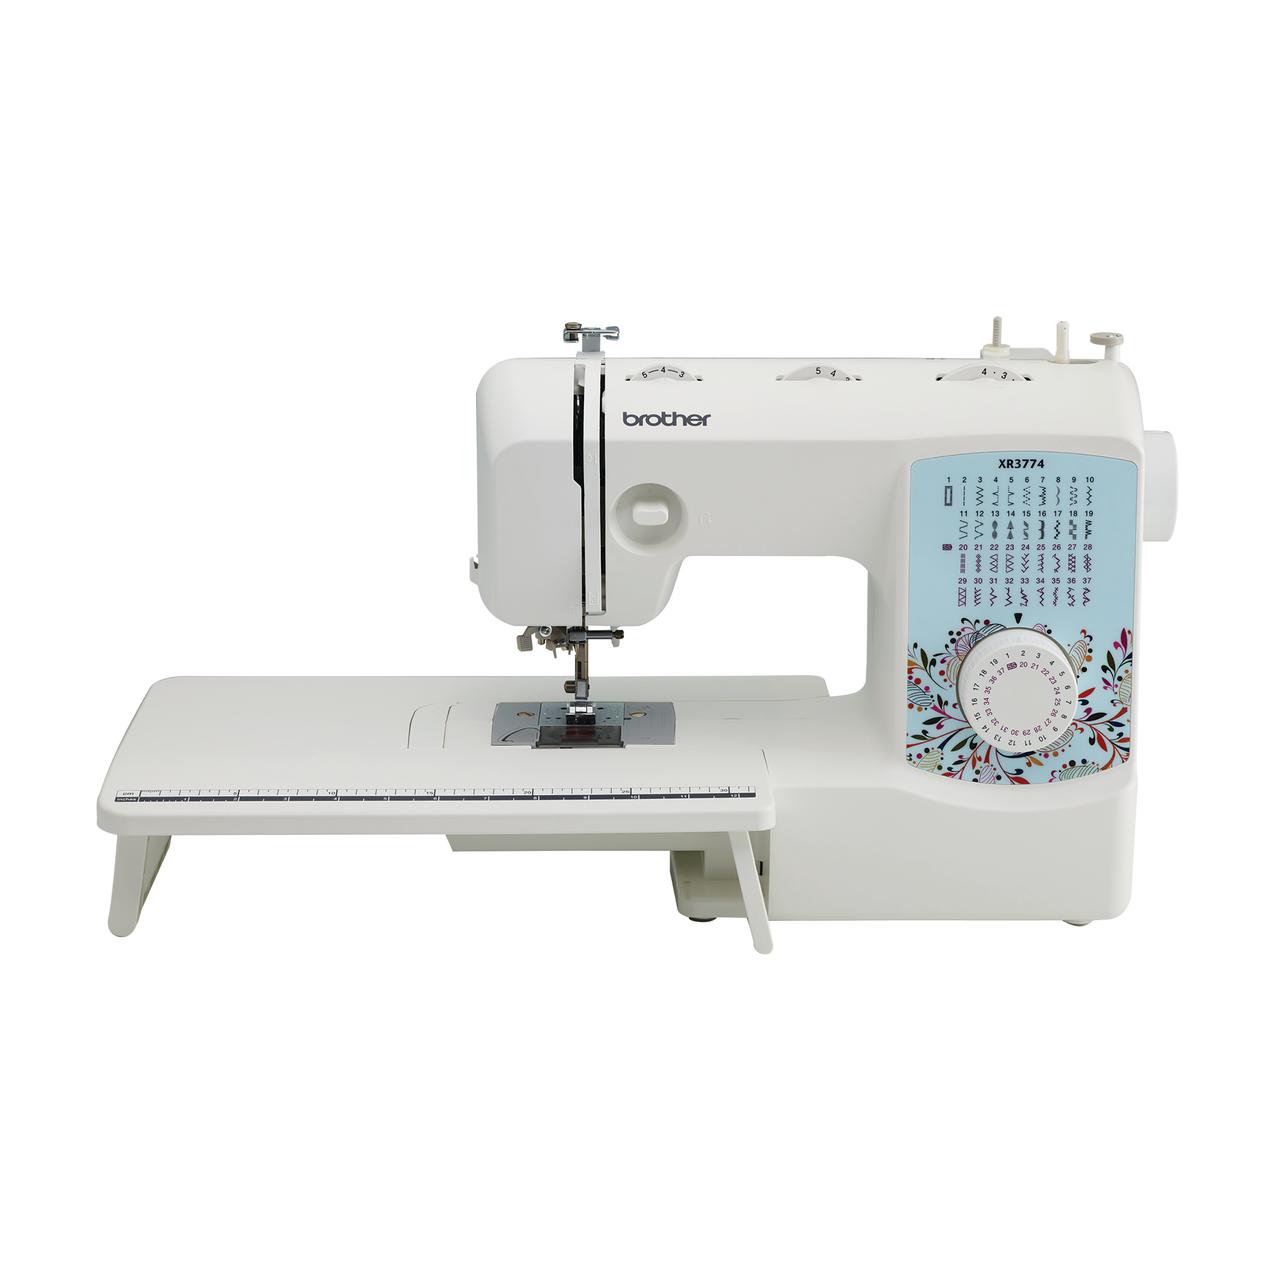 Brother XR3774 Sewing And Quilting Machine with Wide Table and Built-in Stitches - image 1 of 12